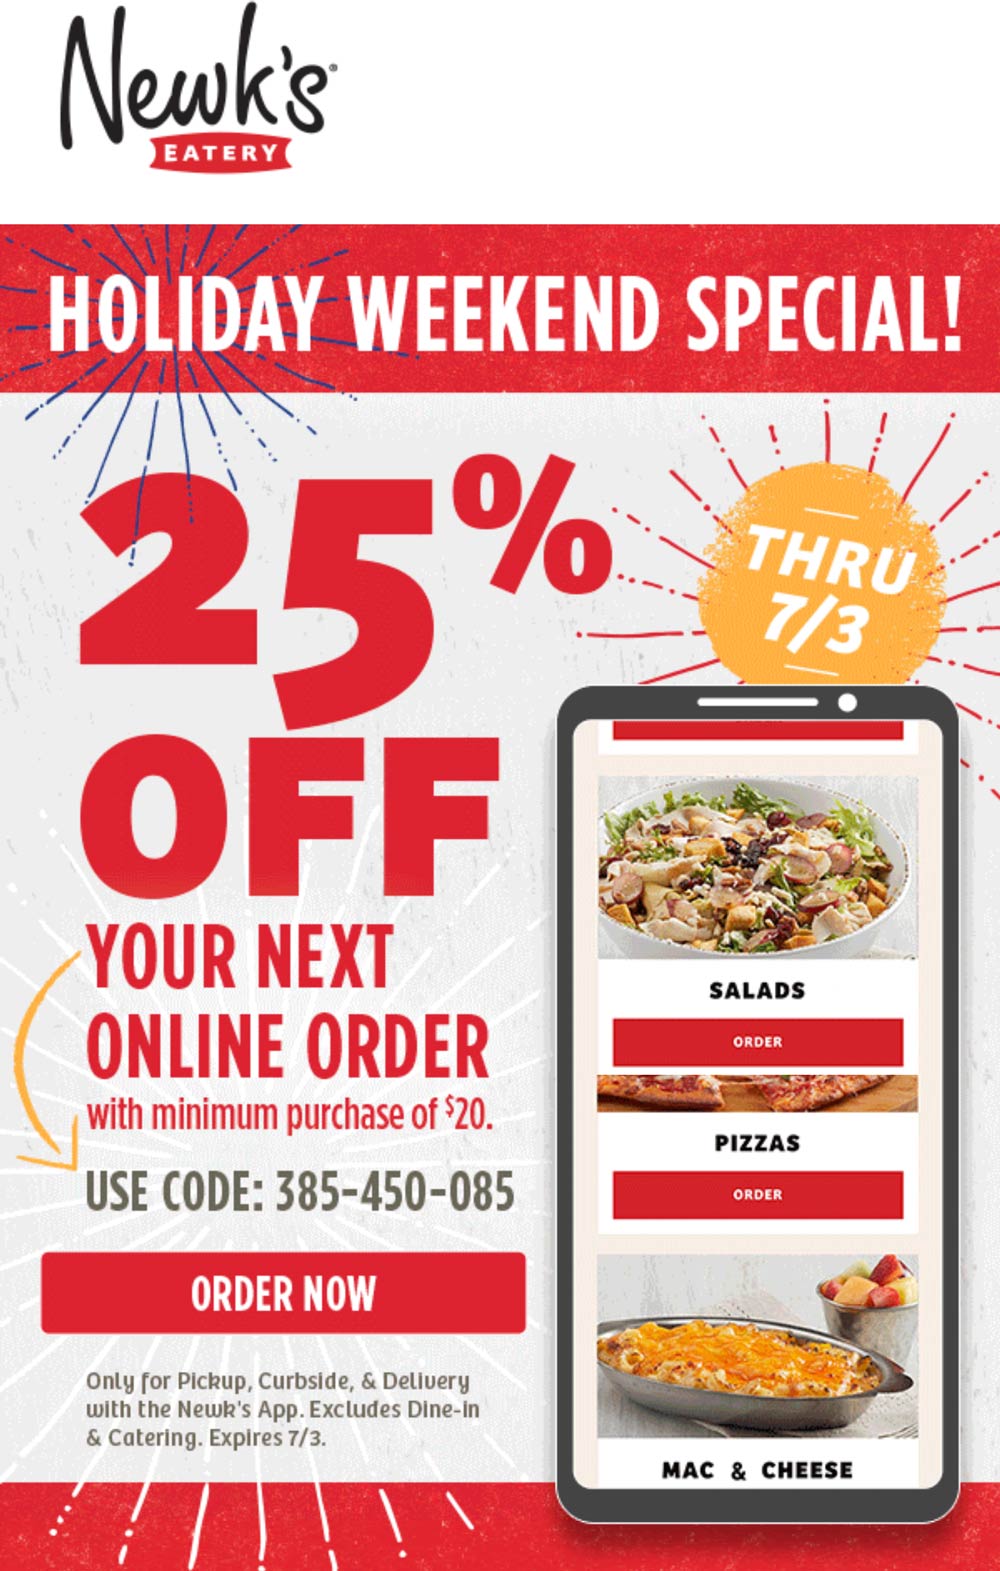 Newks Eatery restaurants Coupon  25% off $20+ online orders at Newks Eatery restaurants via promo code 385-450-085 #newkseatery 